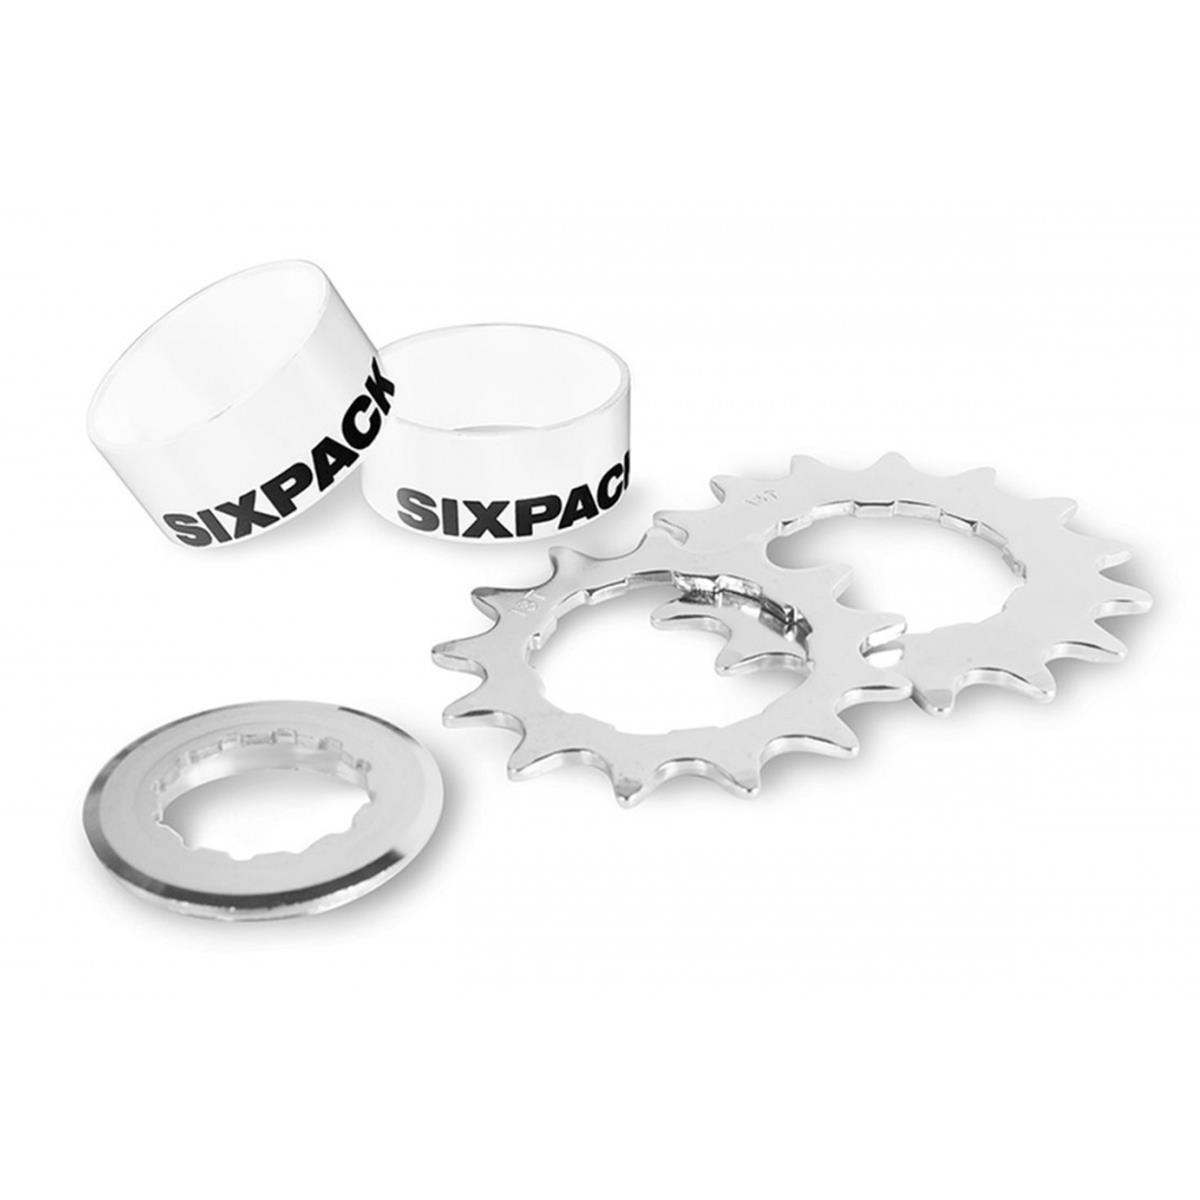 Sixpack Kit conversione Single Speed  White, incl. 2 Chainrings (13 & 15T), fits 8/9710-speed Shimano/Sram Freewheels